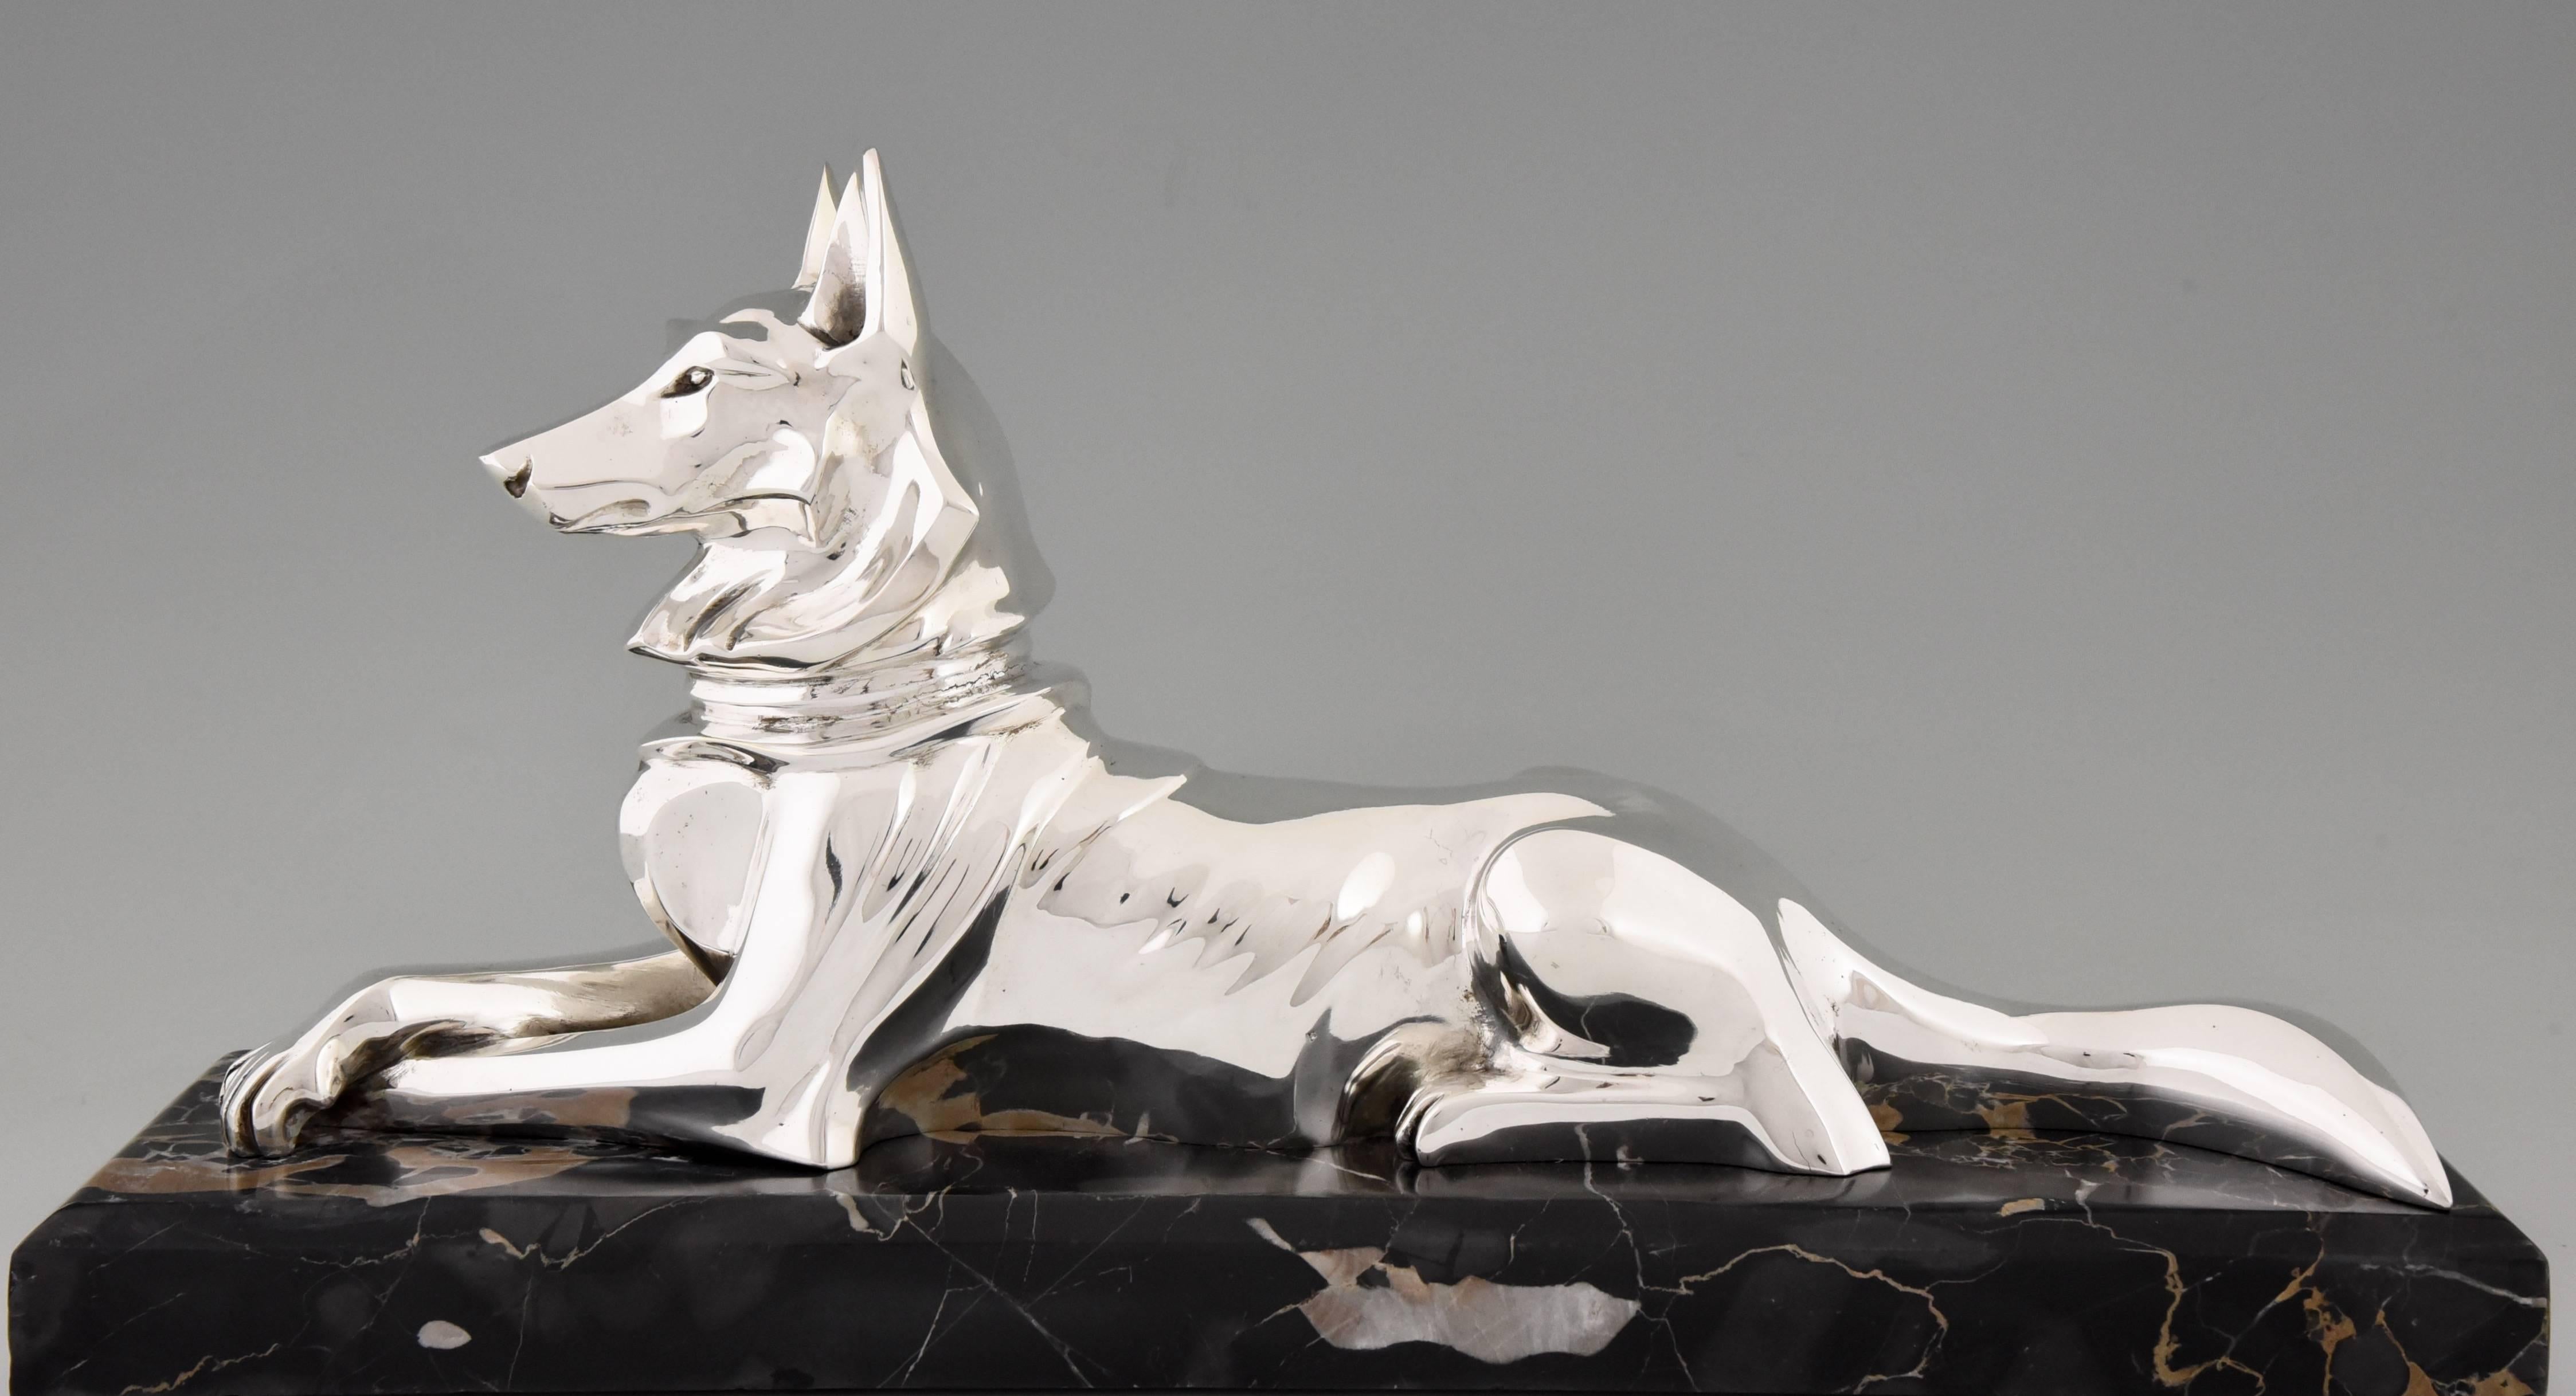 Stylish Art Deco silvered bronze sculpture of a German shepherd by the French artist Petrilly on a Portoro marble base.

Artist / maker:
H. Petrilly.
Signature / marks:
H. Petrilly.
Style:
Art Deco.
Date:
1925-1930.
Material:
Silvered